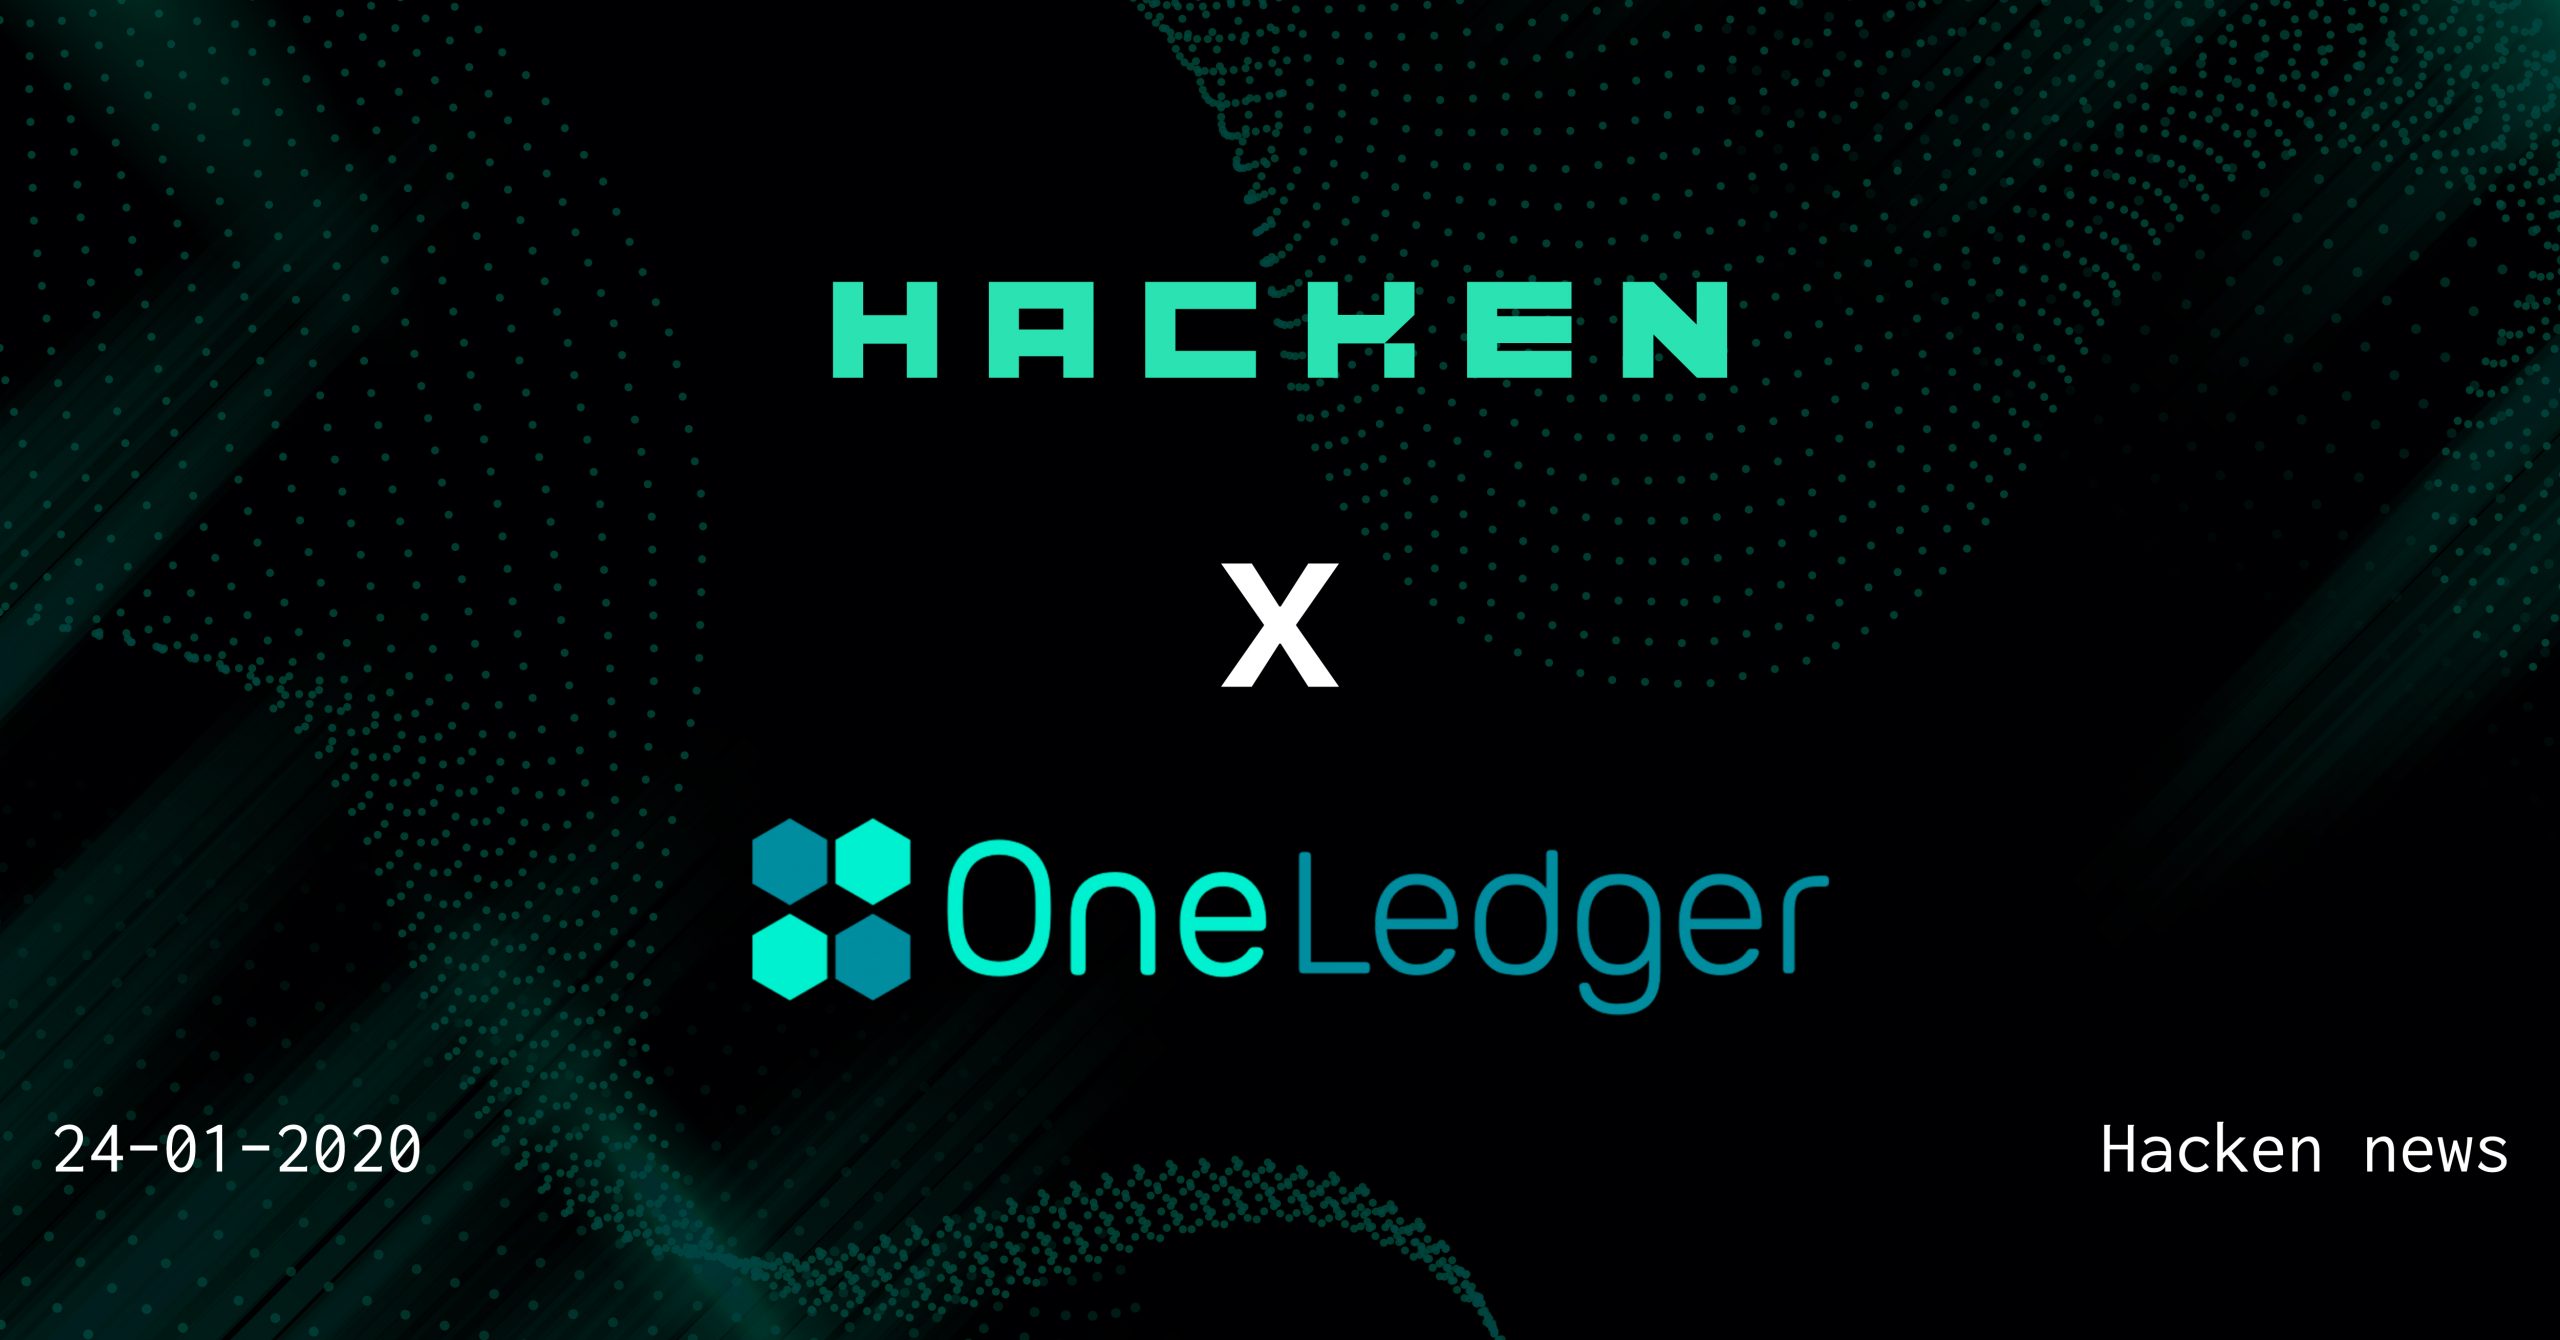 OneLedger Appoints Hacken as a Cyber Security Auditor